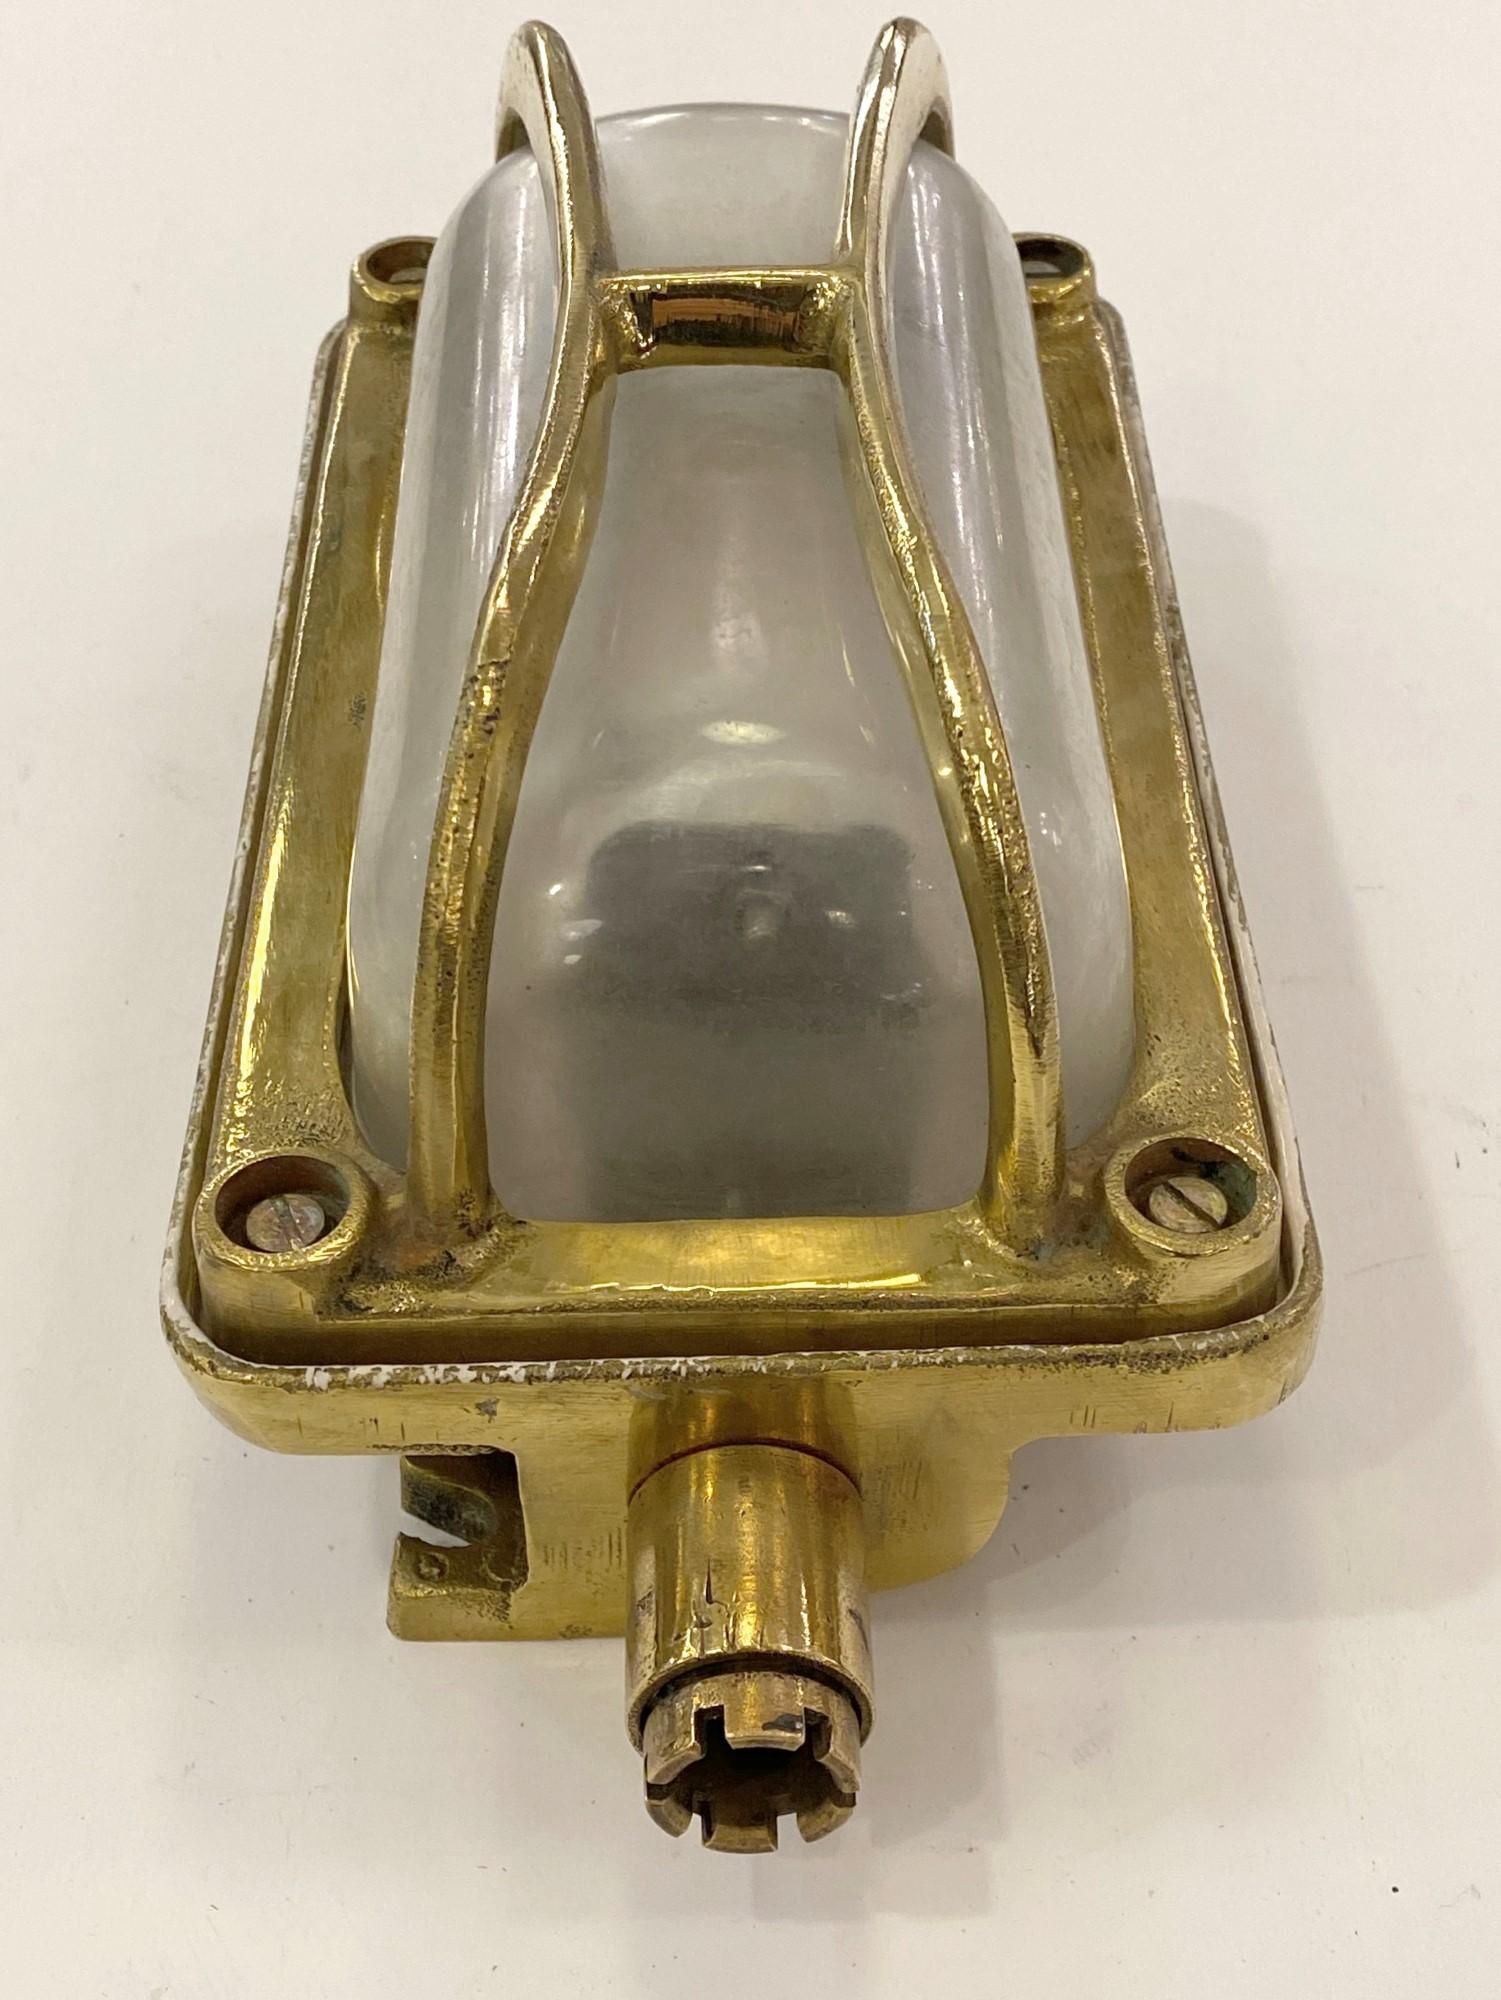 2010s solid brass rectangular nautical bulkhead ship light sconces with a clear glass lens. Industrial style. Has one E26 standard household light bulb socket. Cleaned and rewired. Small quantity available at time of posting. Priced each. Please